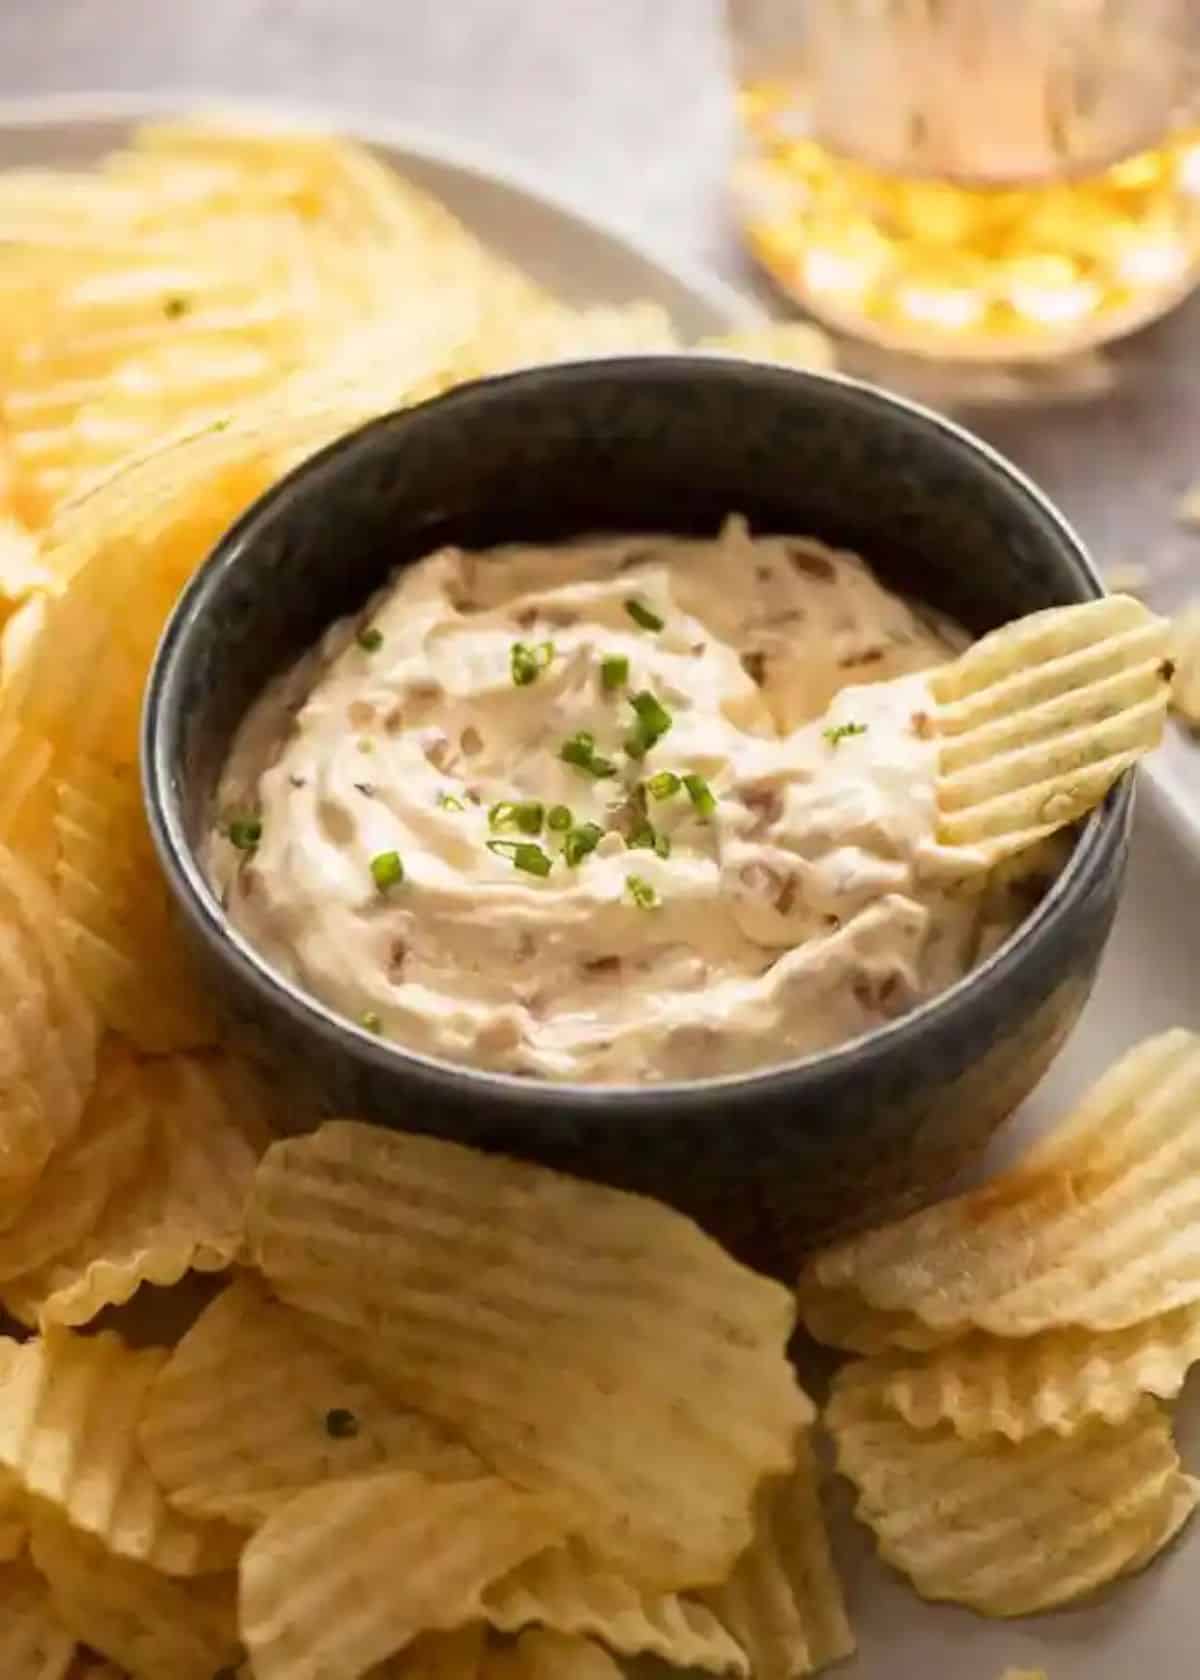 Creamy sour cream homemade french onion dip in a black bowl.